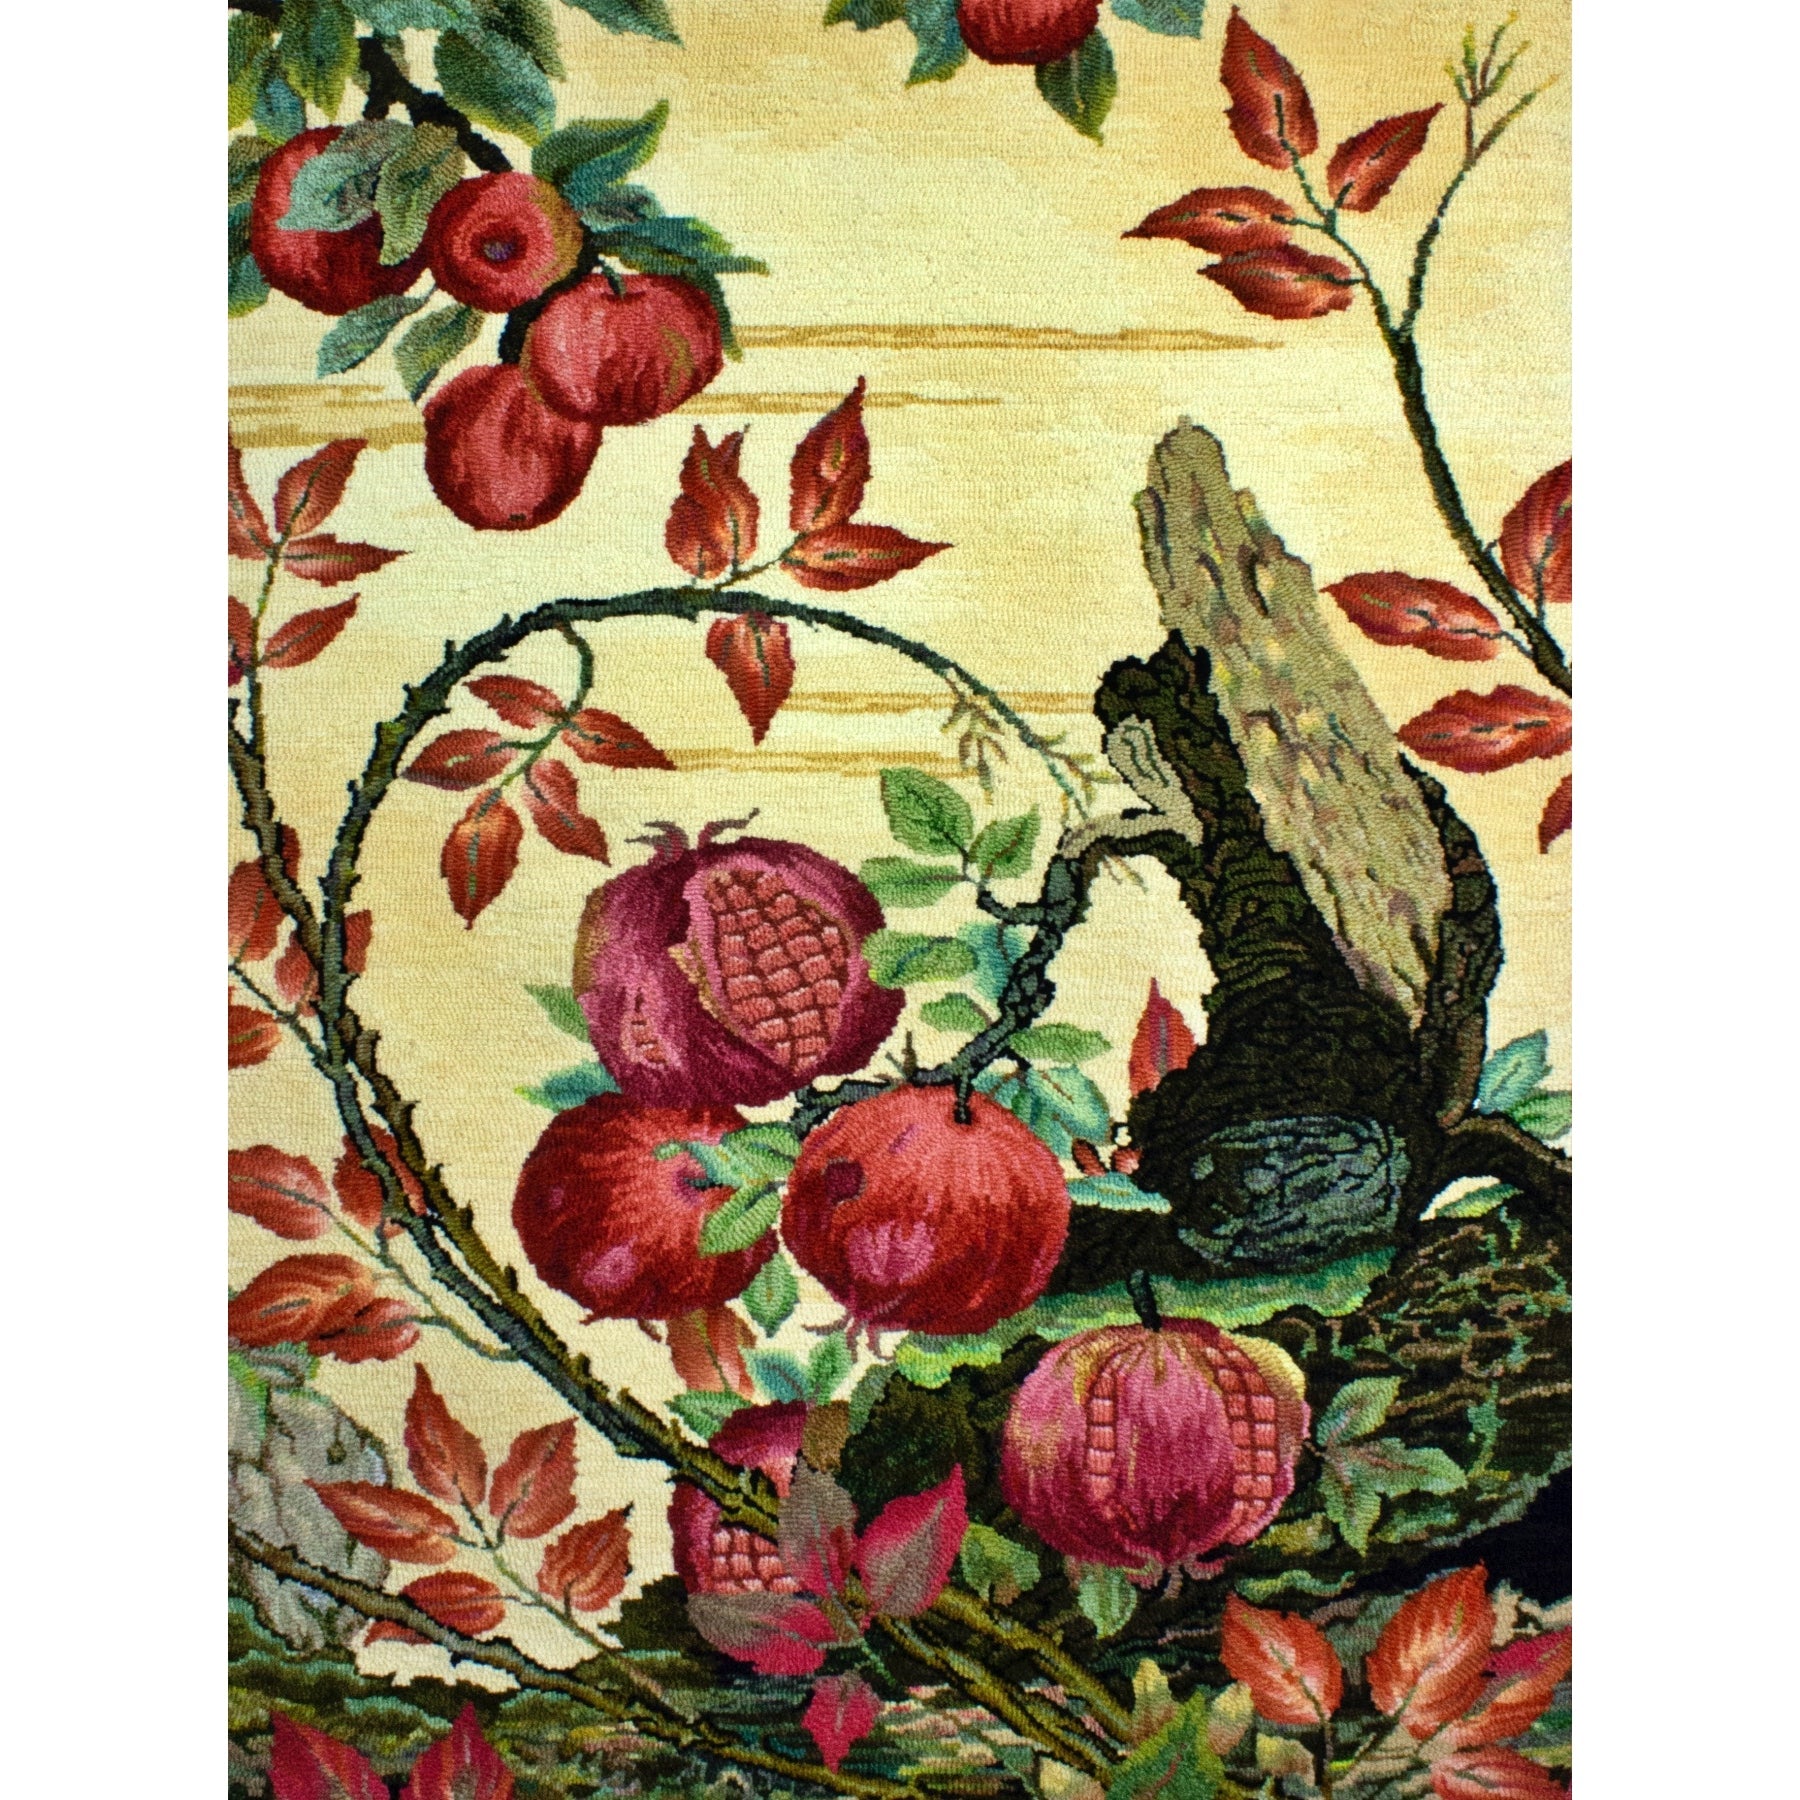 The Trees and the Bramble, Ill. E.J.  Detmold, 1909, rug hooked by Jane McGown Flynn